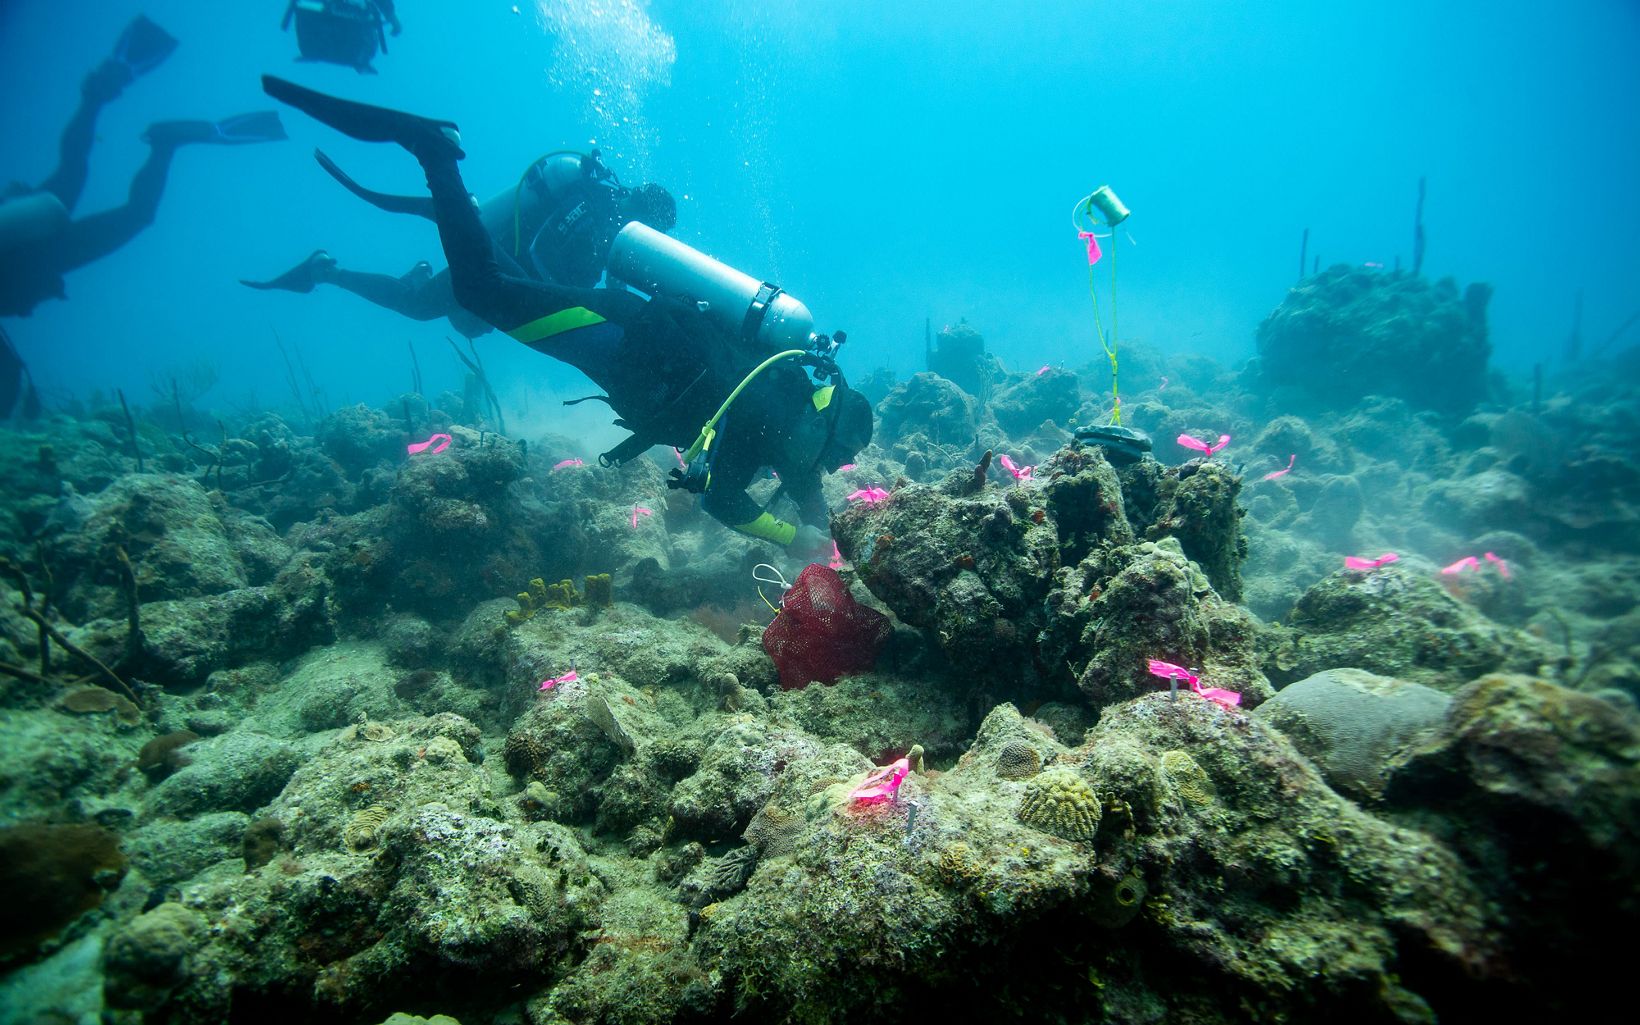 Coral Reef Restoration A diver with a bag of coral fragments zip ties them to nails in the coral bed indicated by pink ribbons. © Paul A. Selvaggio/TNC